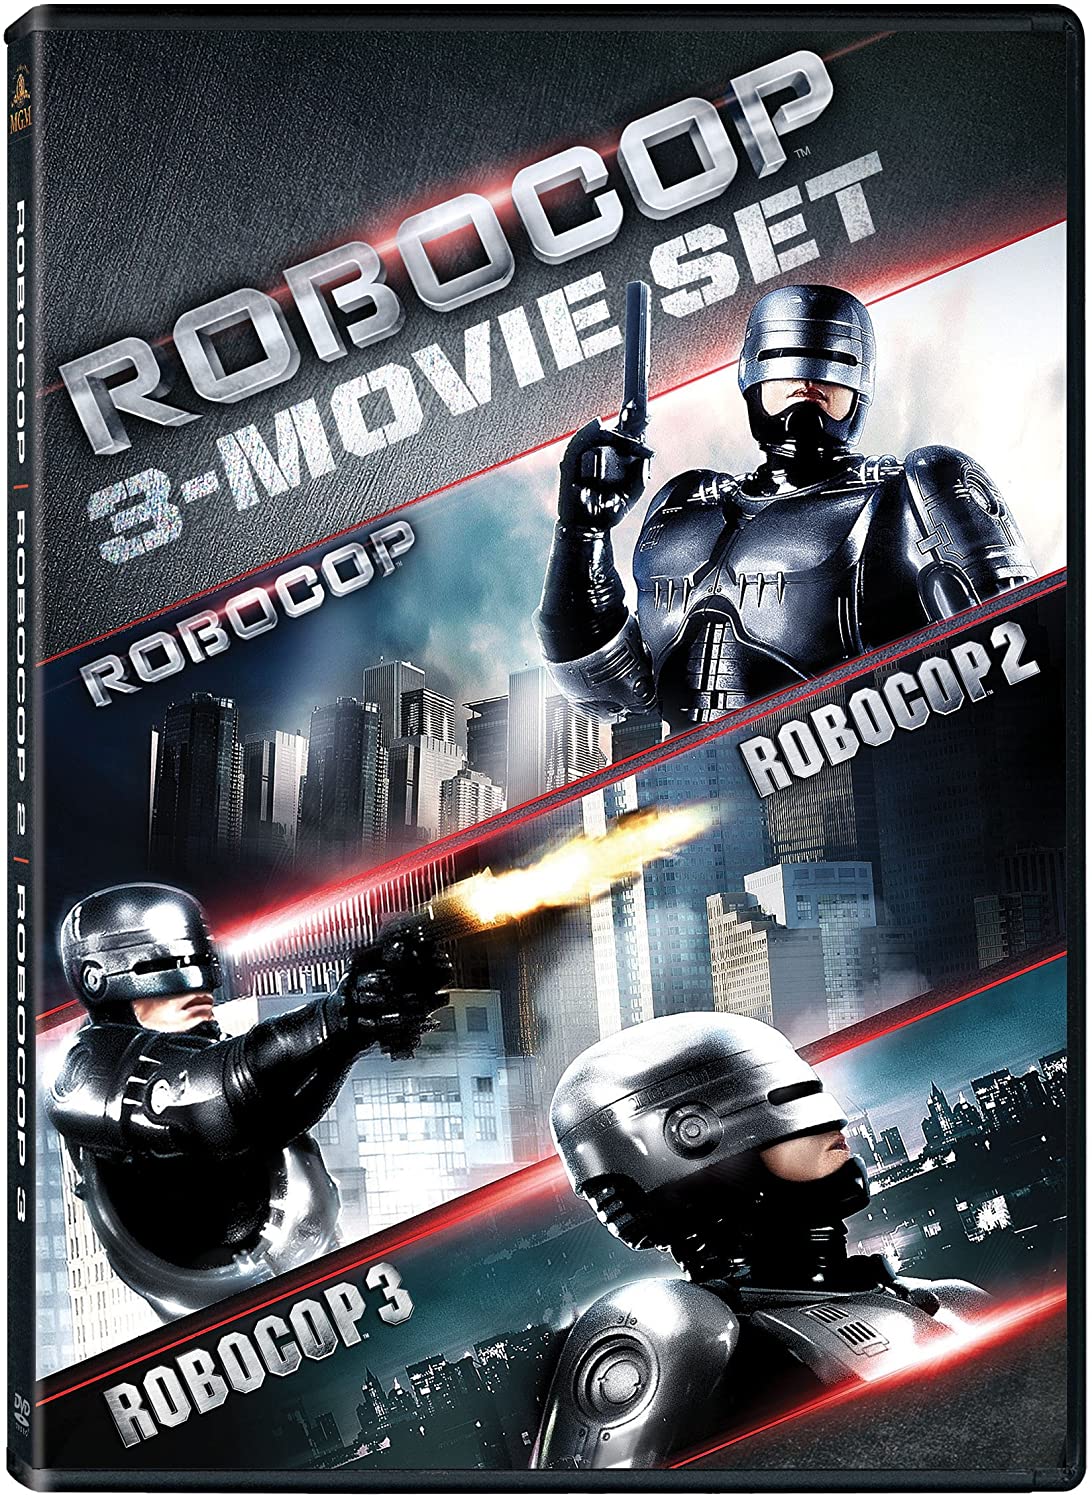 RoboCop: Trilogy Collection [Blu-ray] $9.96, [DVD] $7.50 at Amazon